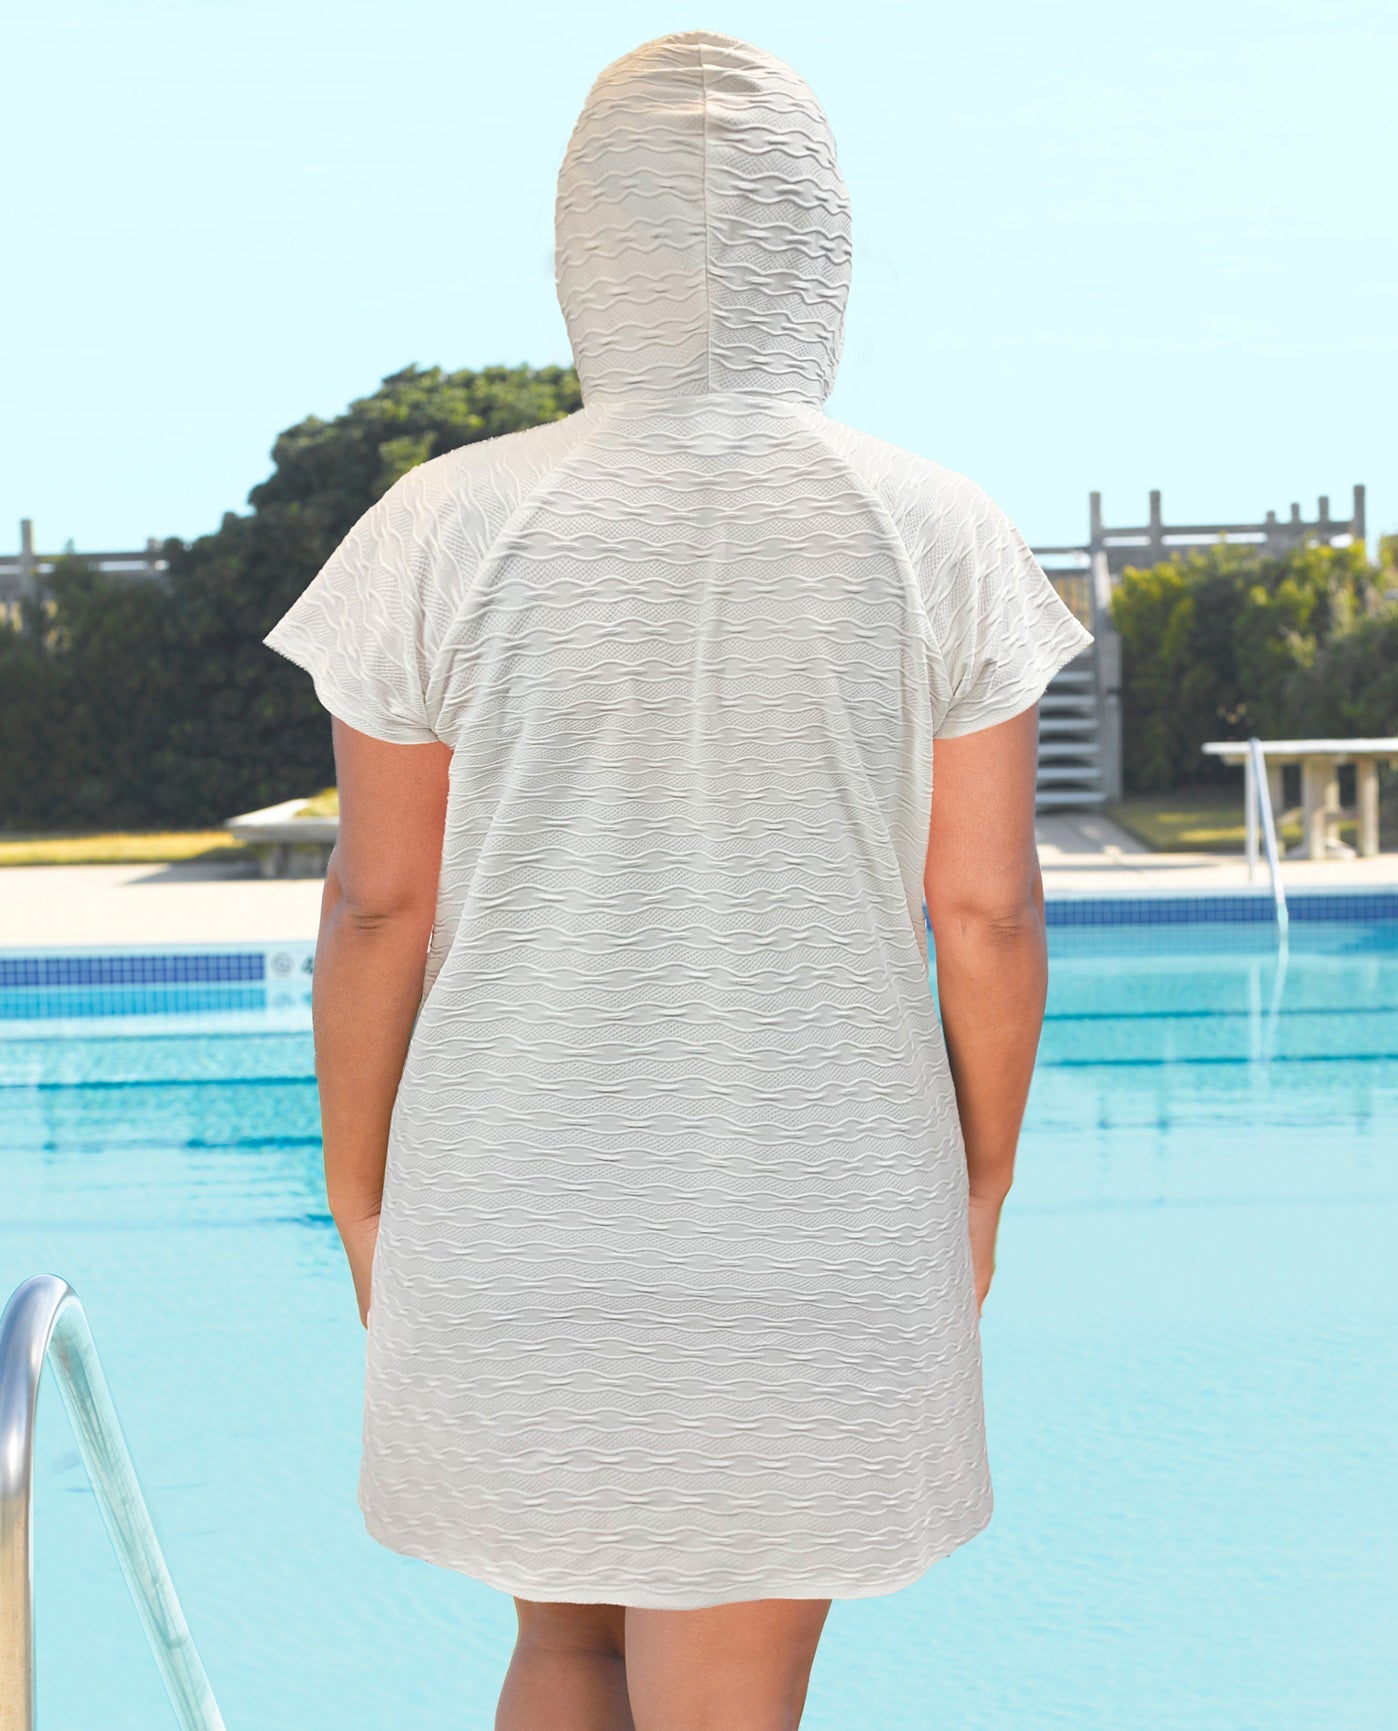 HOOD UP BACK VIEW OF AQUAMORE SOLID TEXTURED ZIPPER HOODIE PLUS SIZE COVER UP TUNIC | 016 AQM TEXTURED CREAM